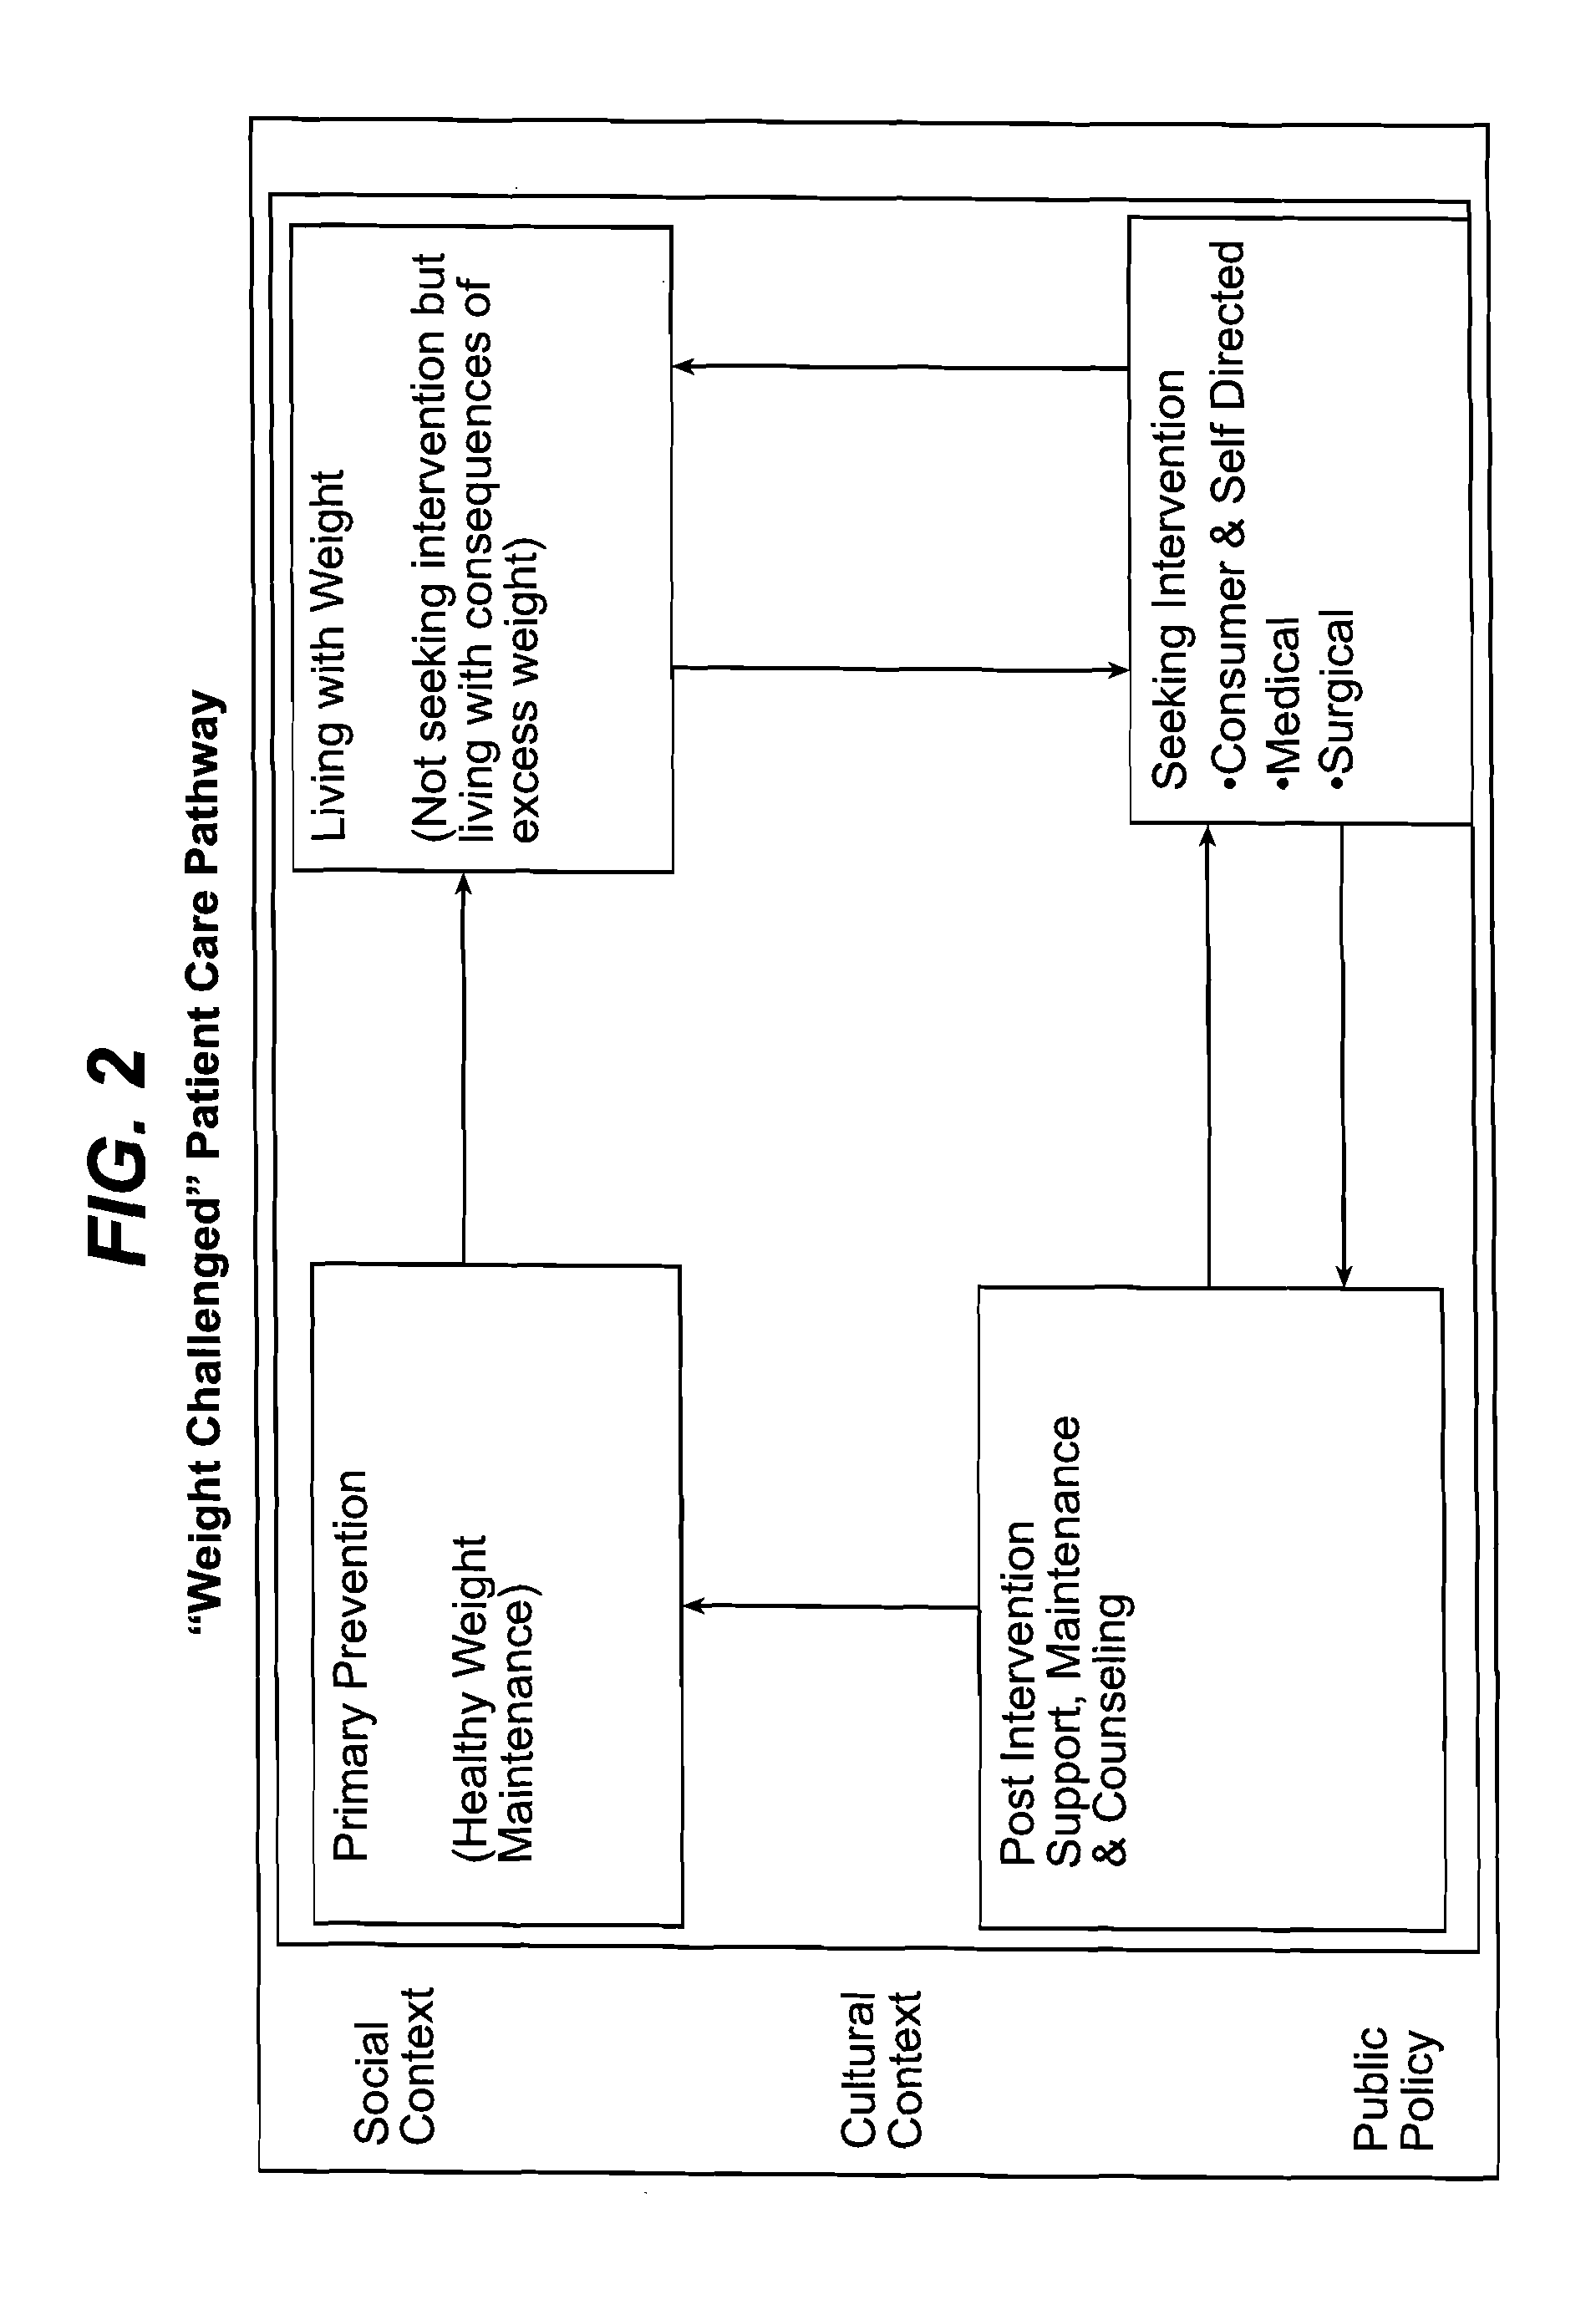 Method and Apparatus of Assessing Need for Health Care and Facilitating The Provision of Health Care